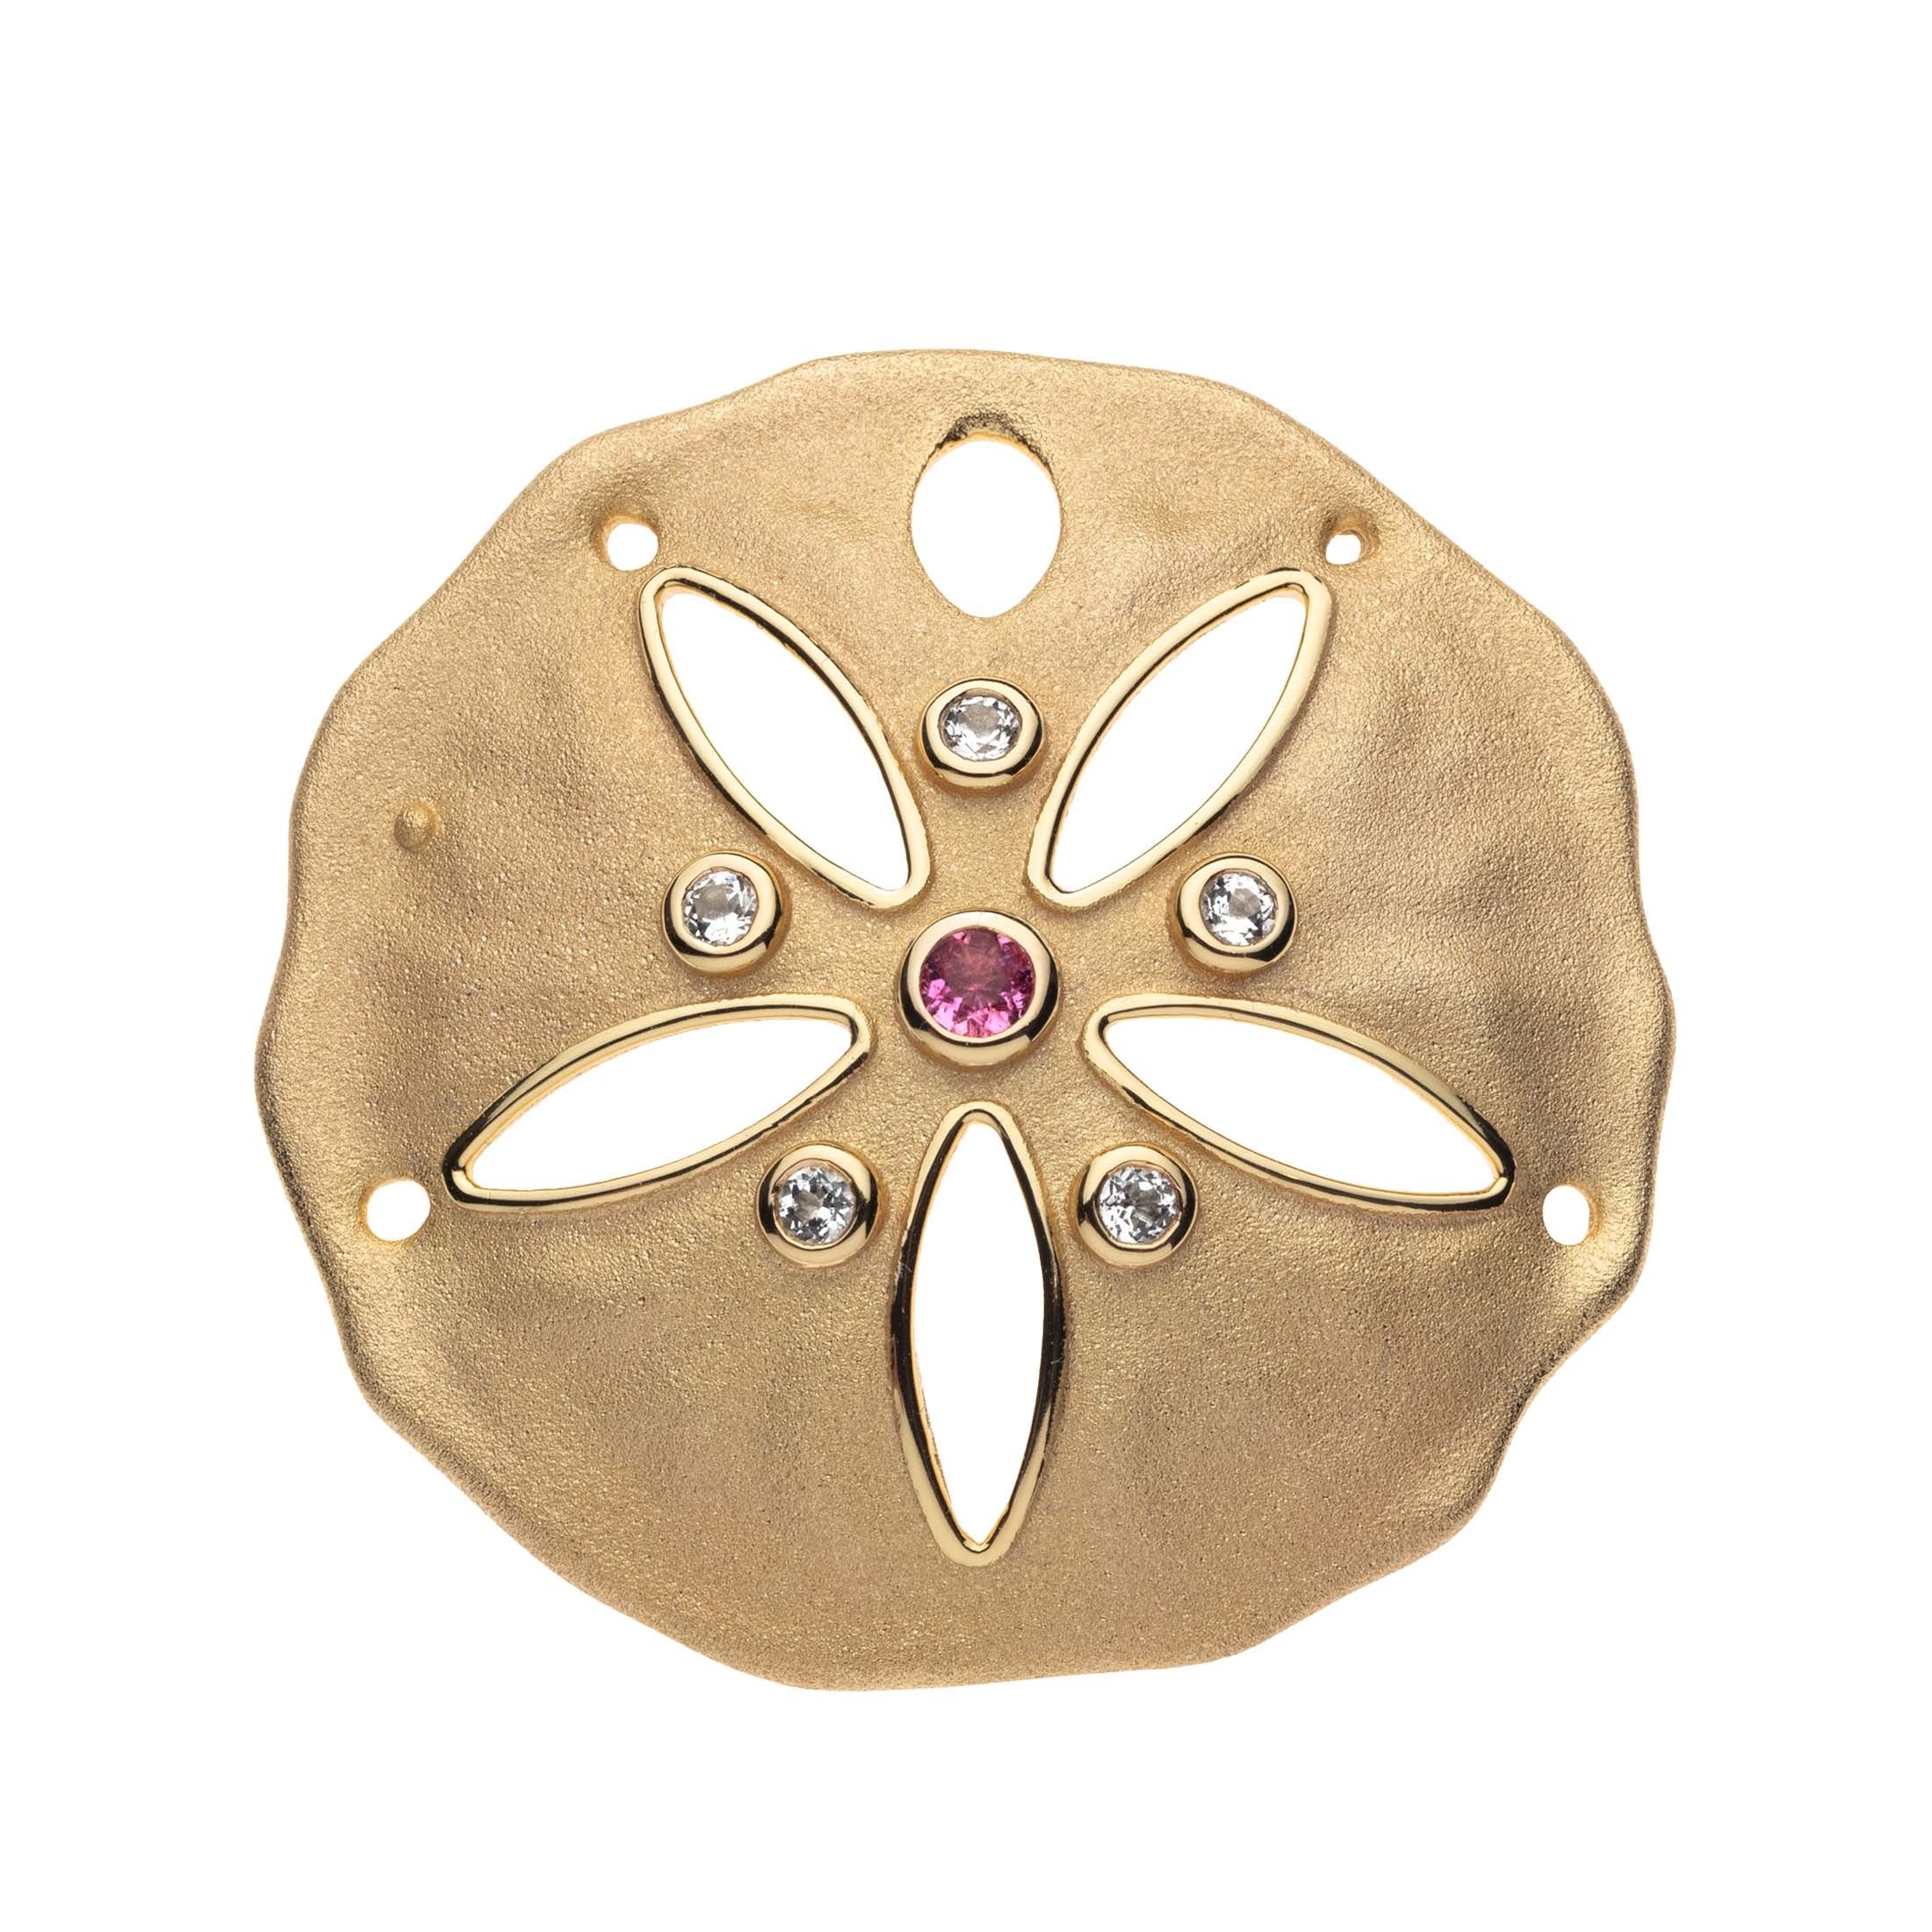 Jane Win STRONG Sand Dollar Pendant Necklace